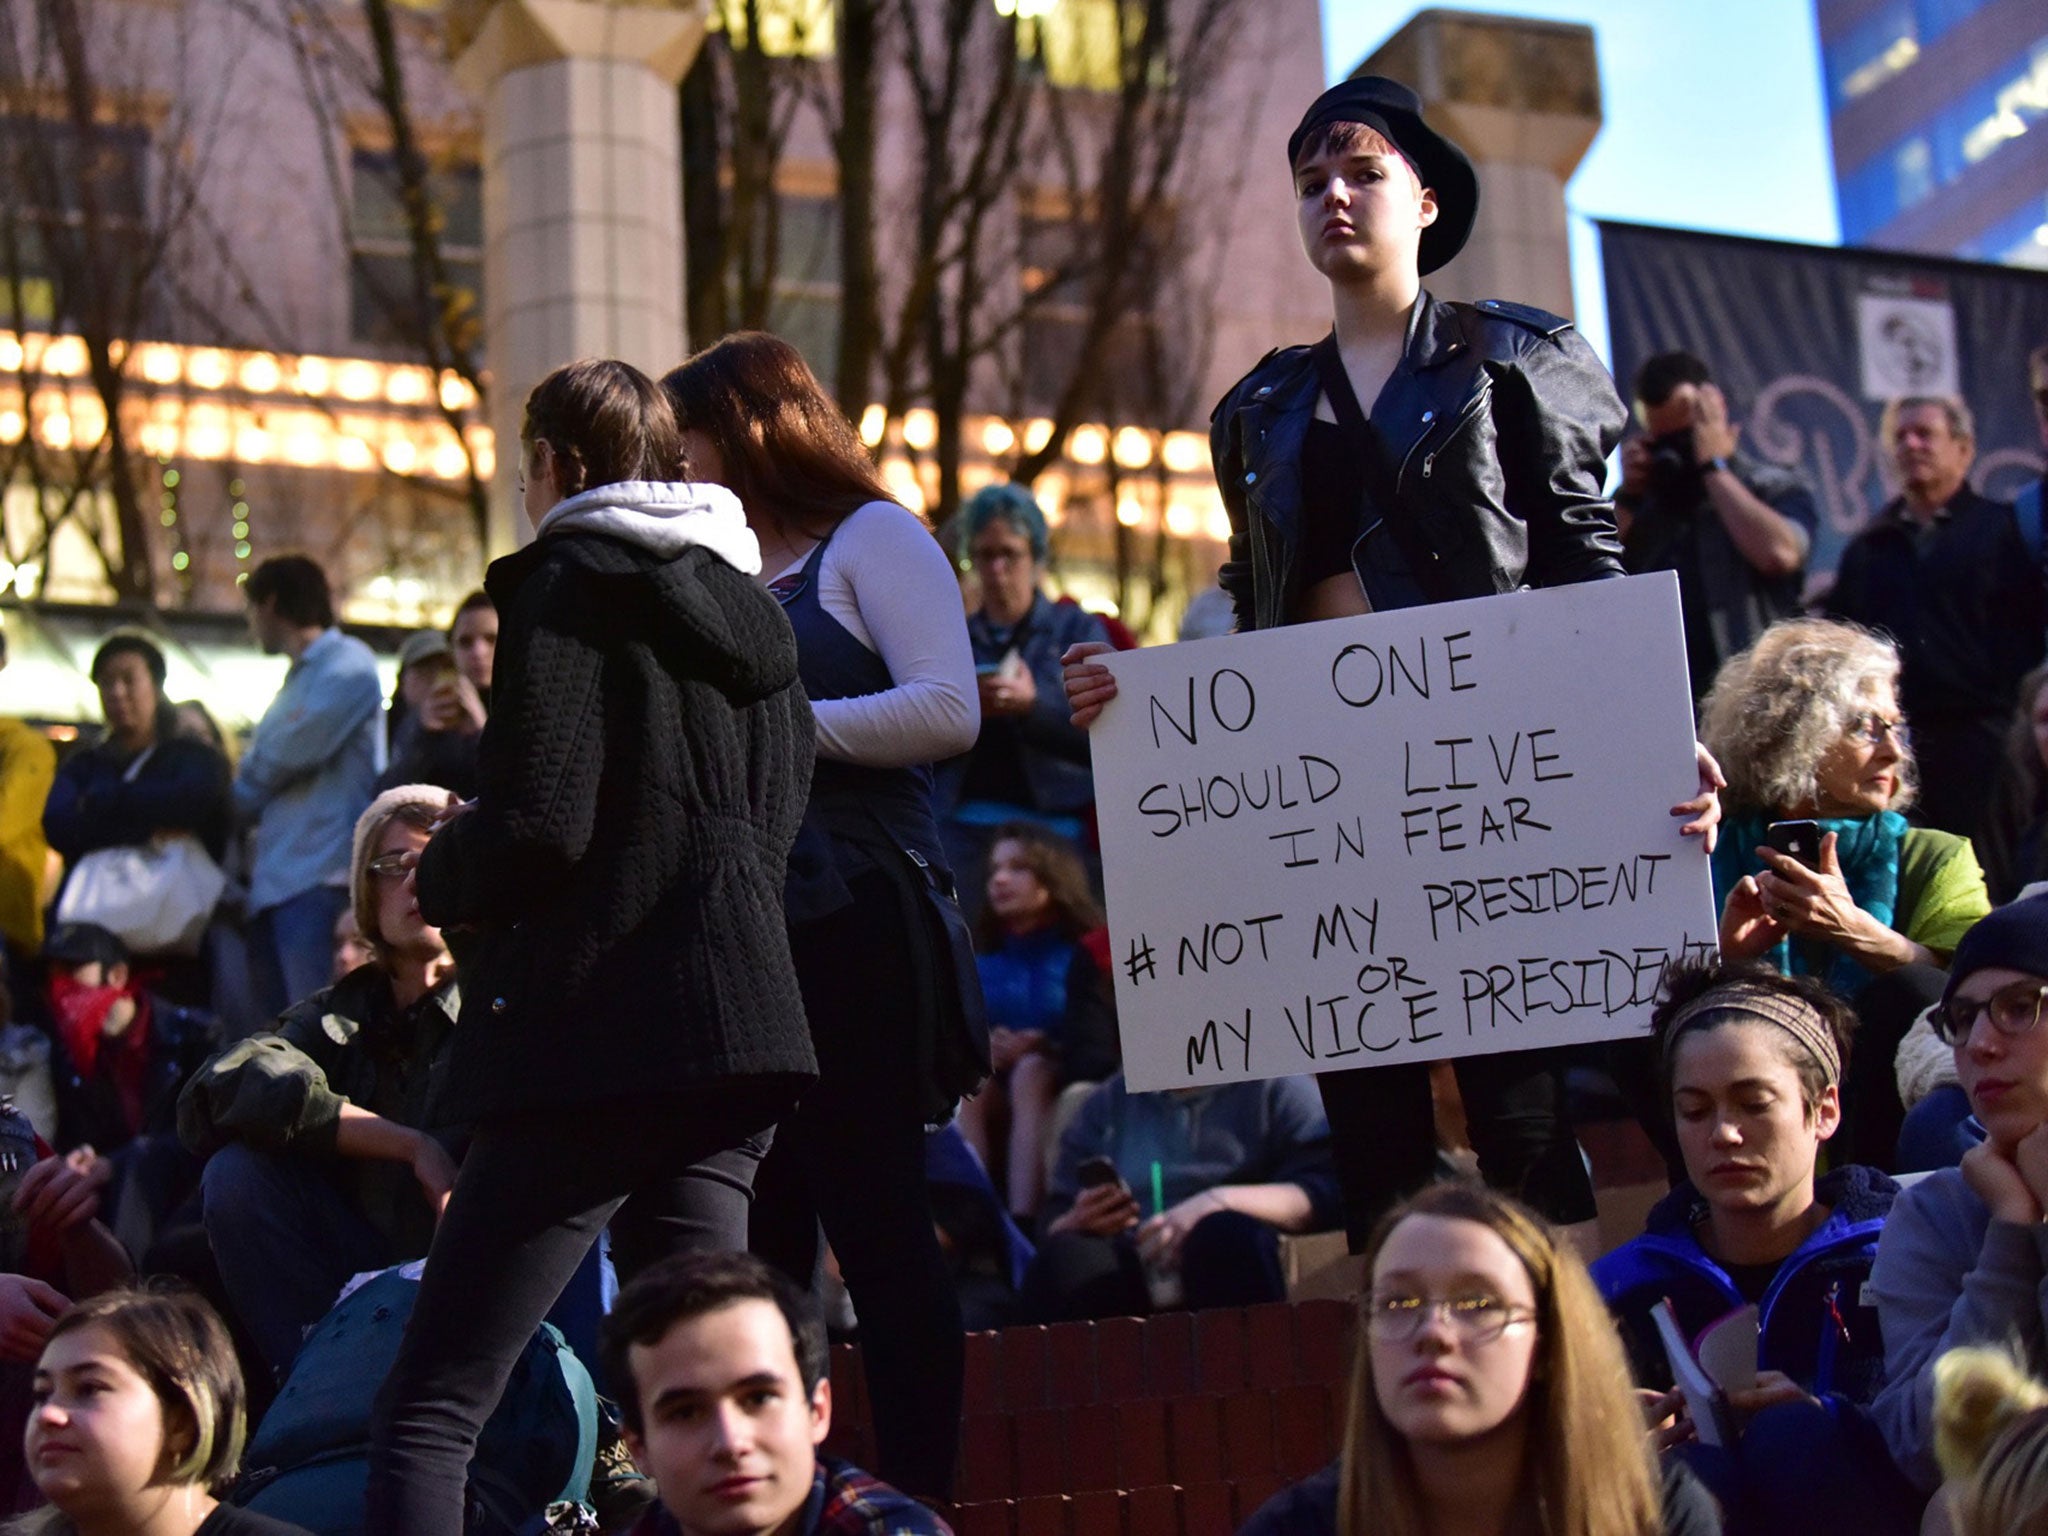 Protesters gather in Pioneer Courthouse Square in Portland, the third night of protests over the results of the presidential election, on 10 November 2016.